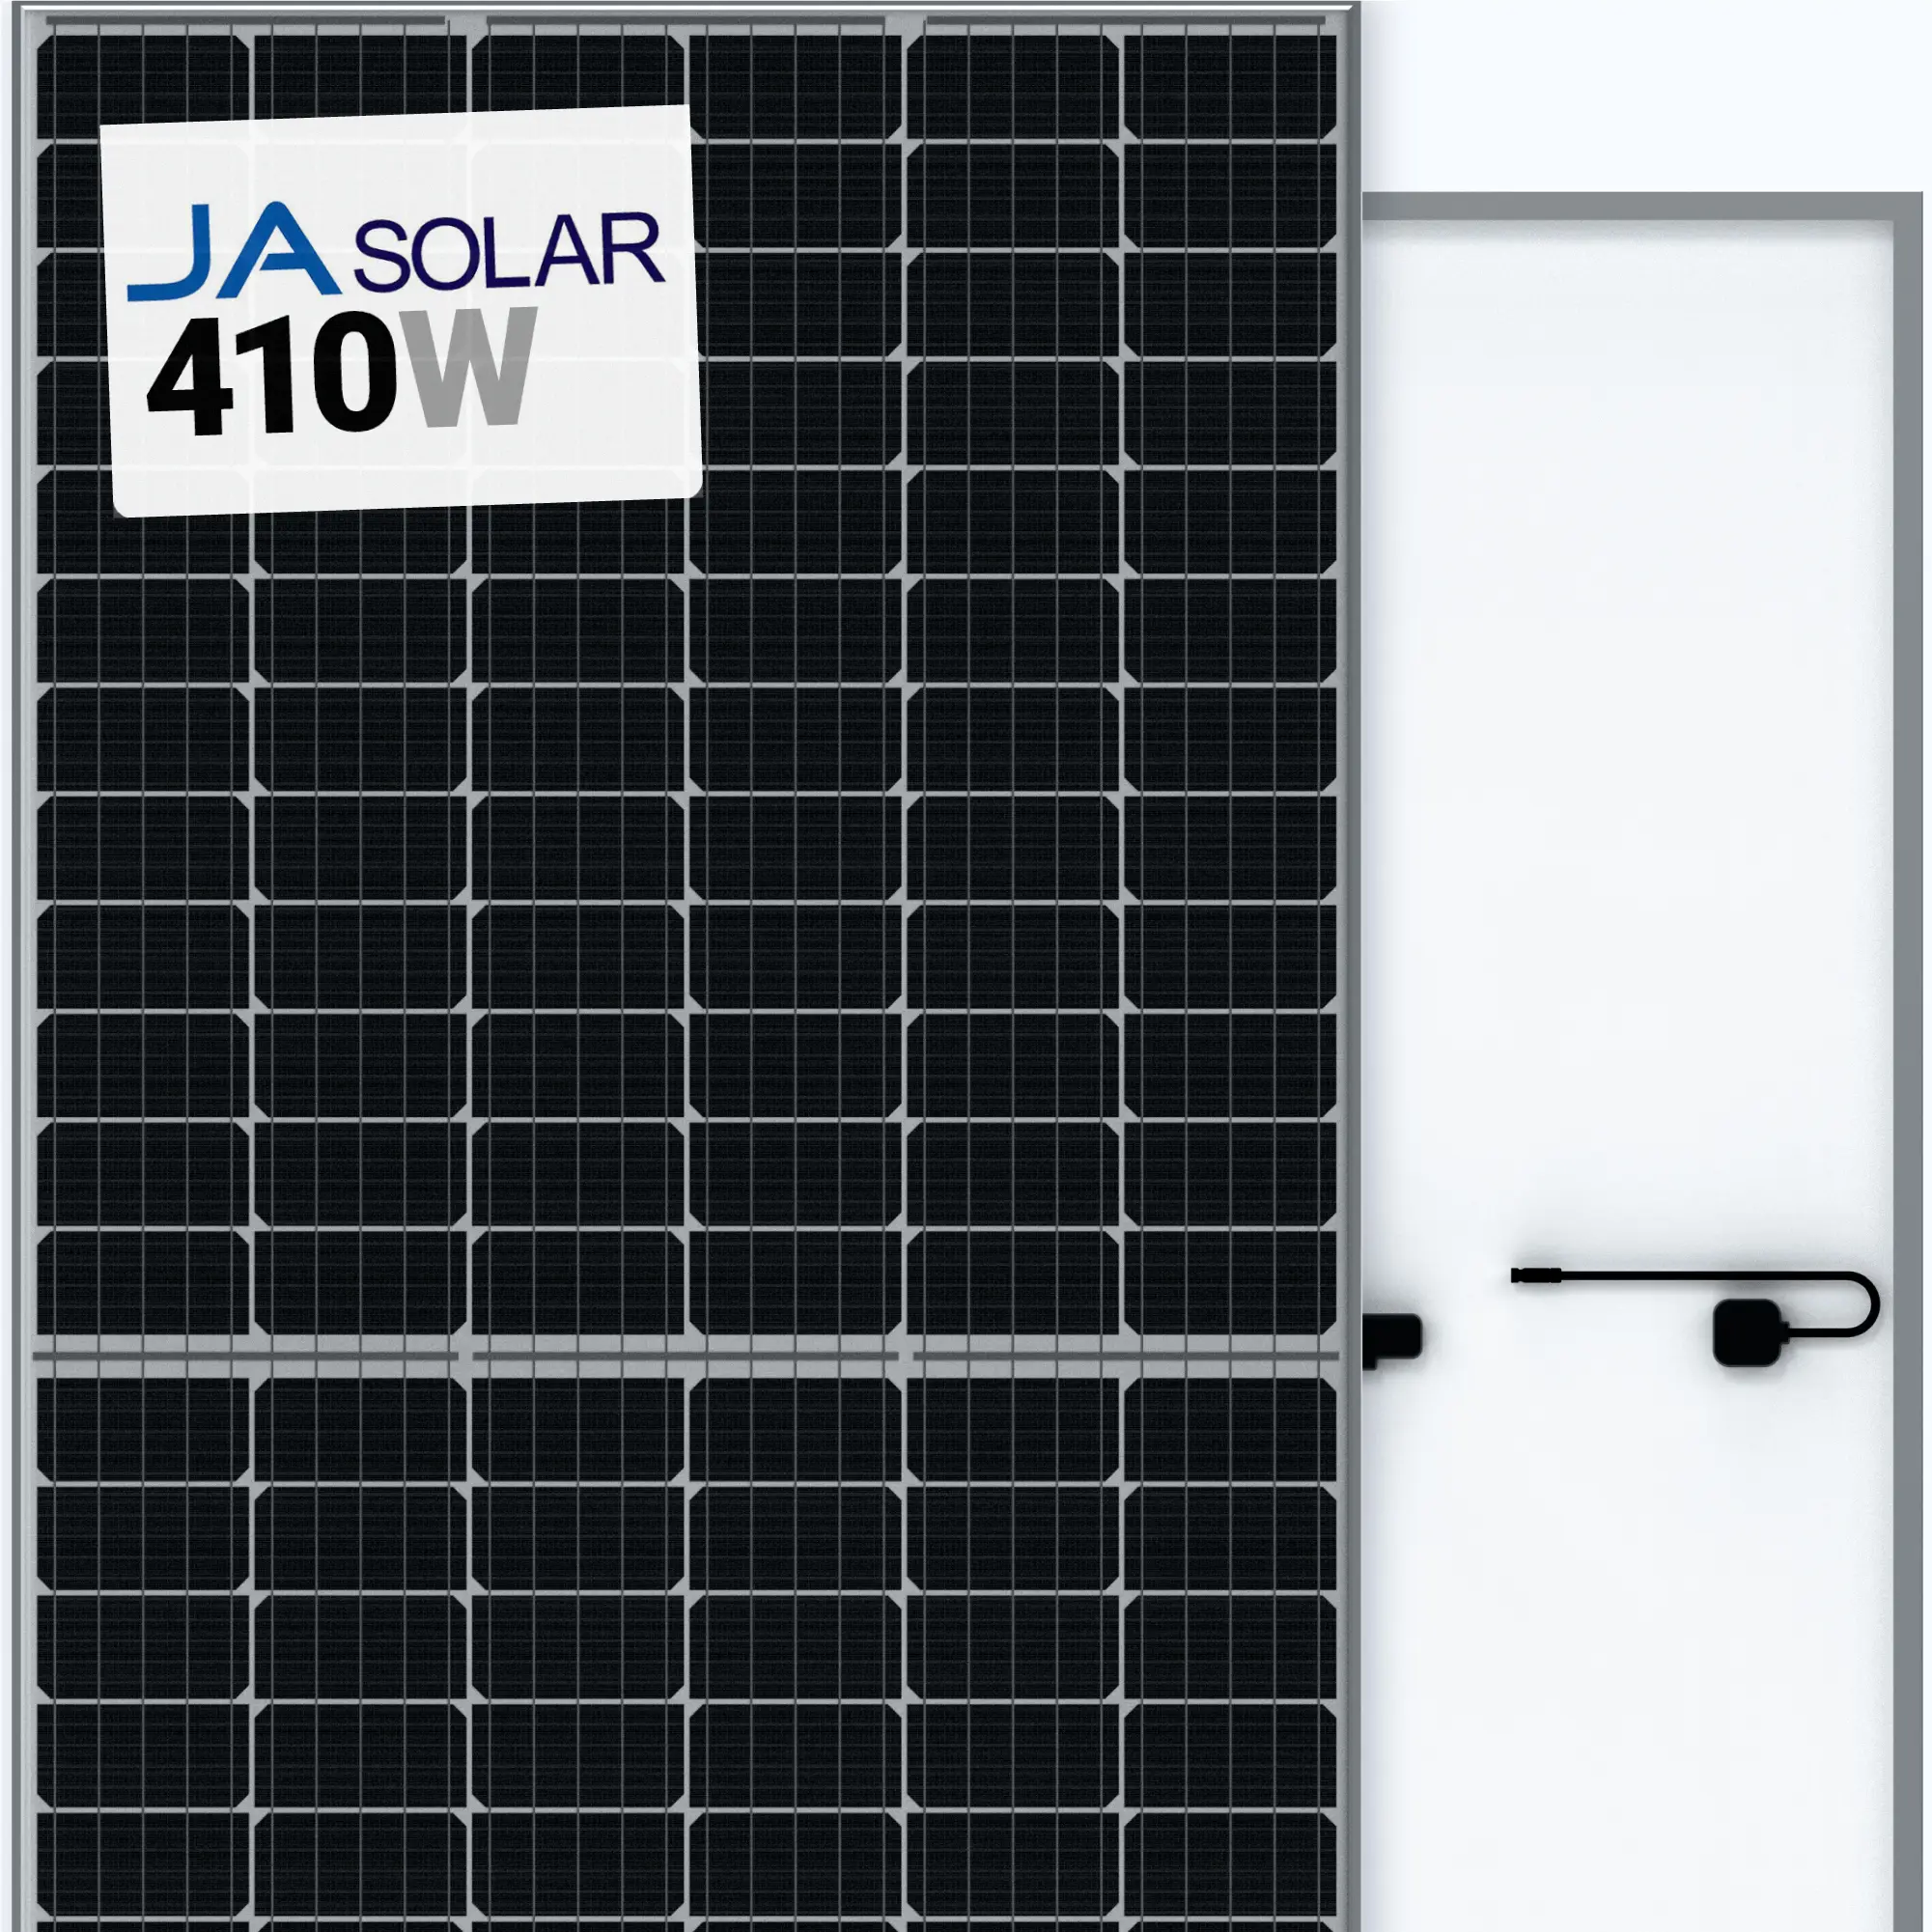 ja solar panel sizes - What are the dimensions of a JA Solar 450w panel